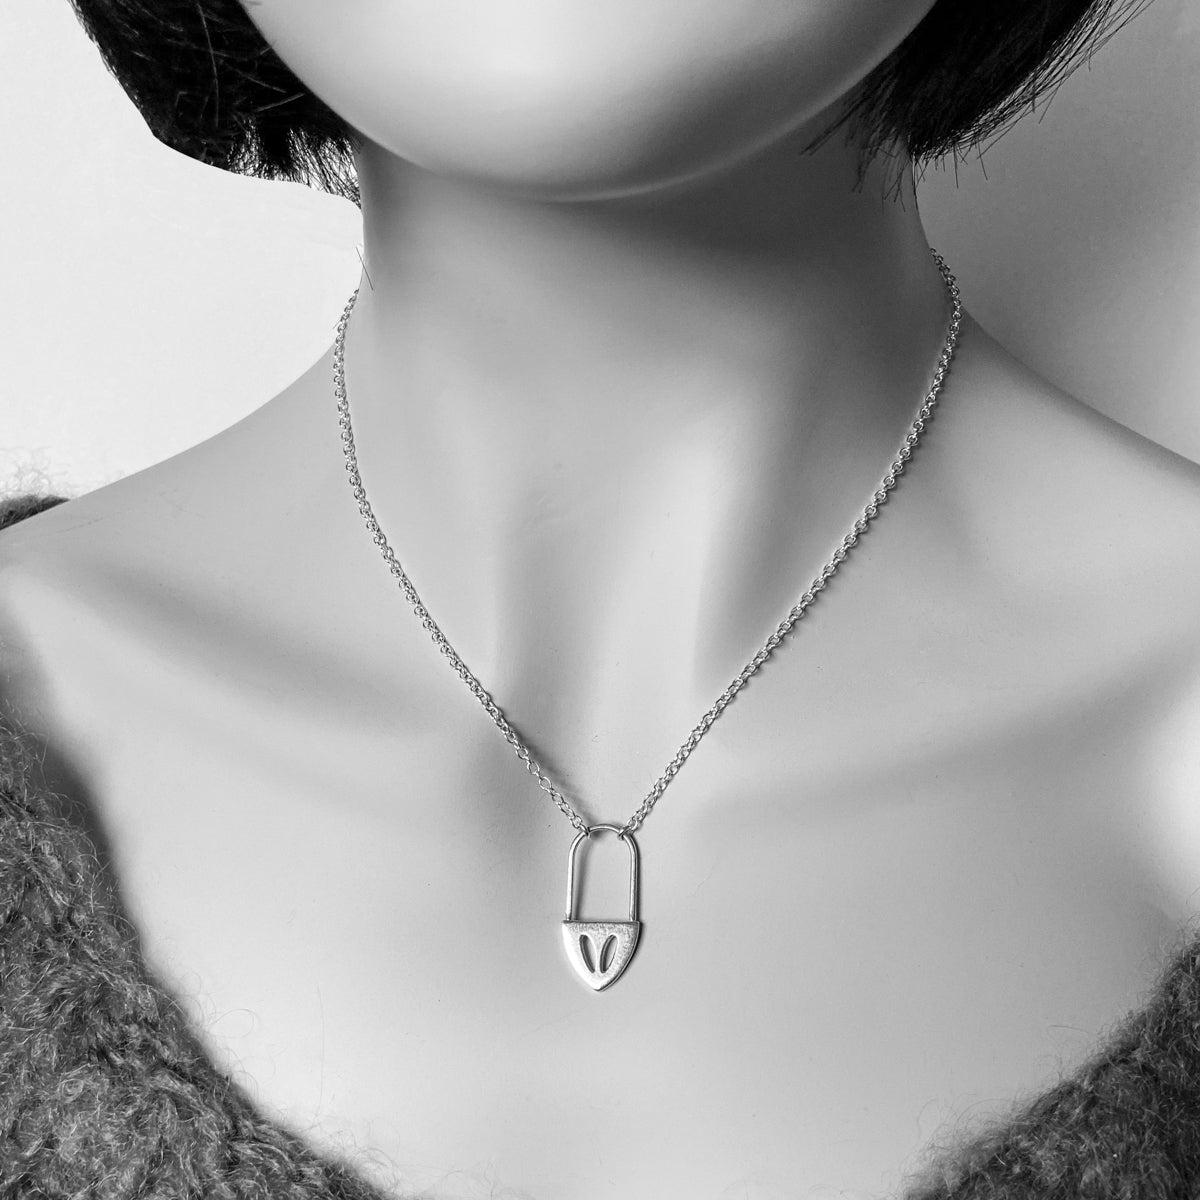 Drop Stockinette Stitch Necklace in Sterling Silver for Yarn Lovers